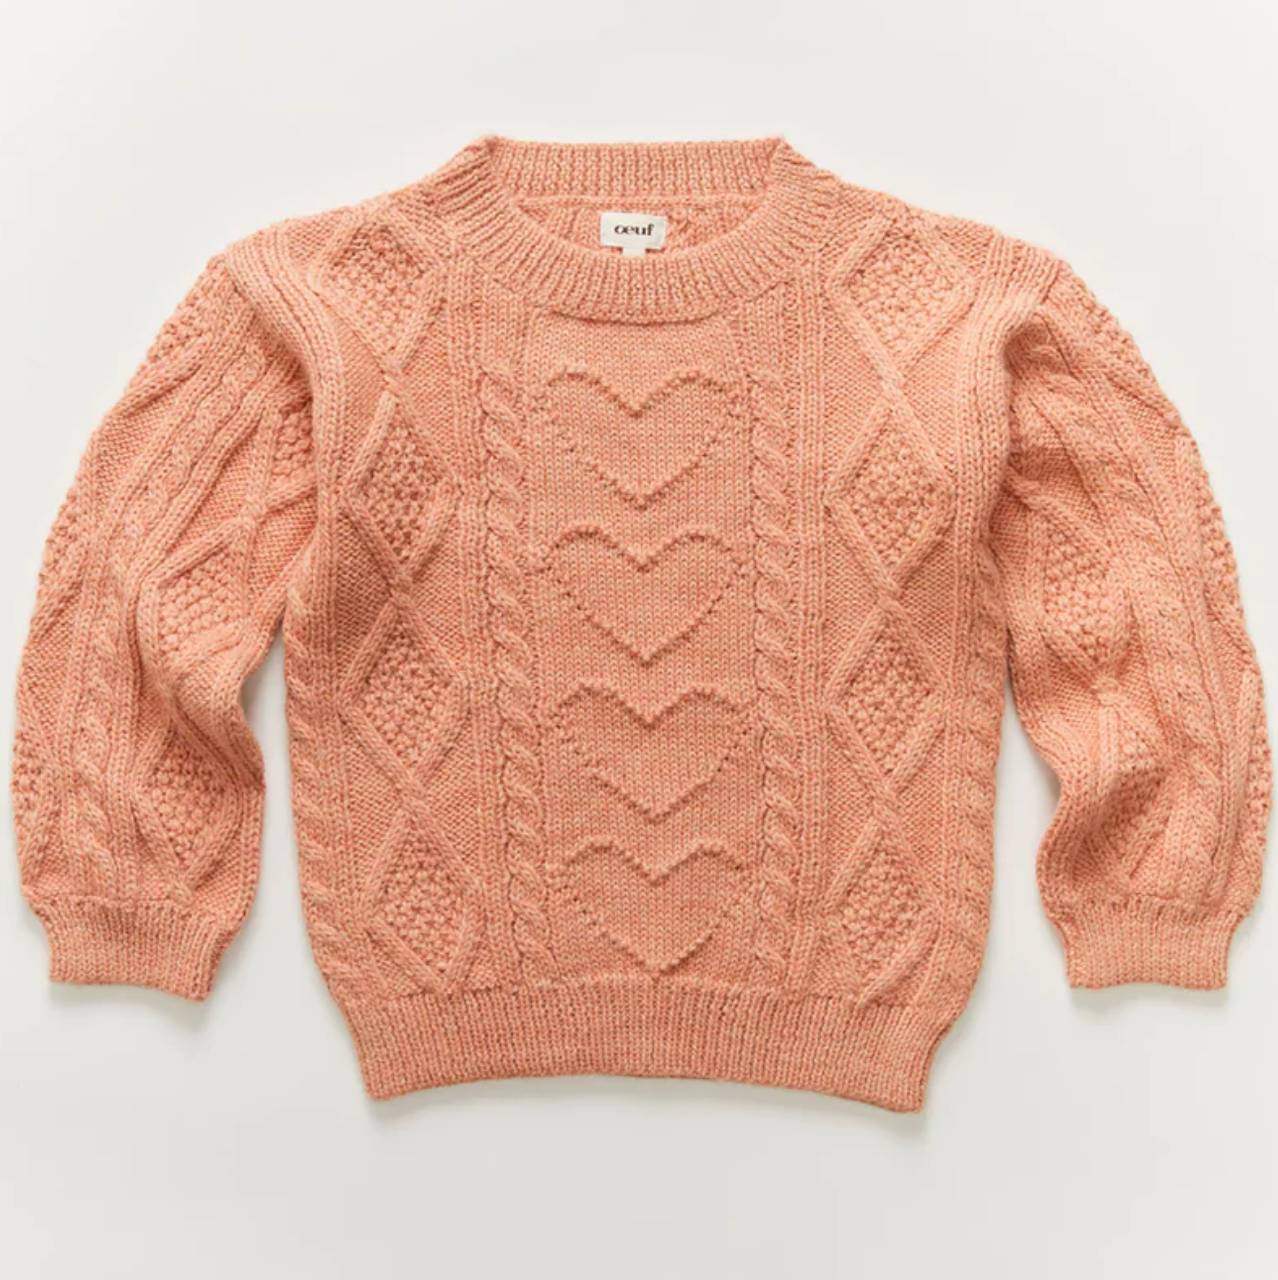 Oeuf Heart Cable Sweater - Bellini